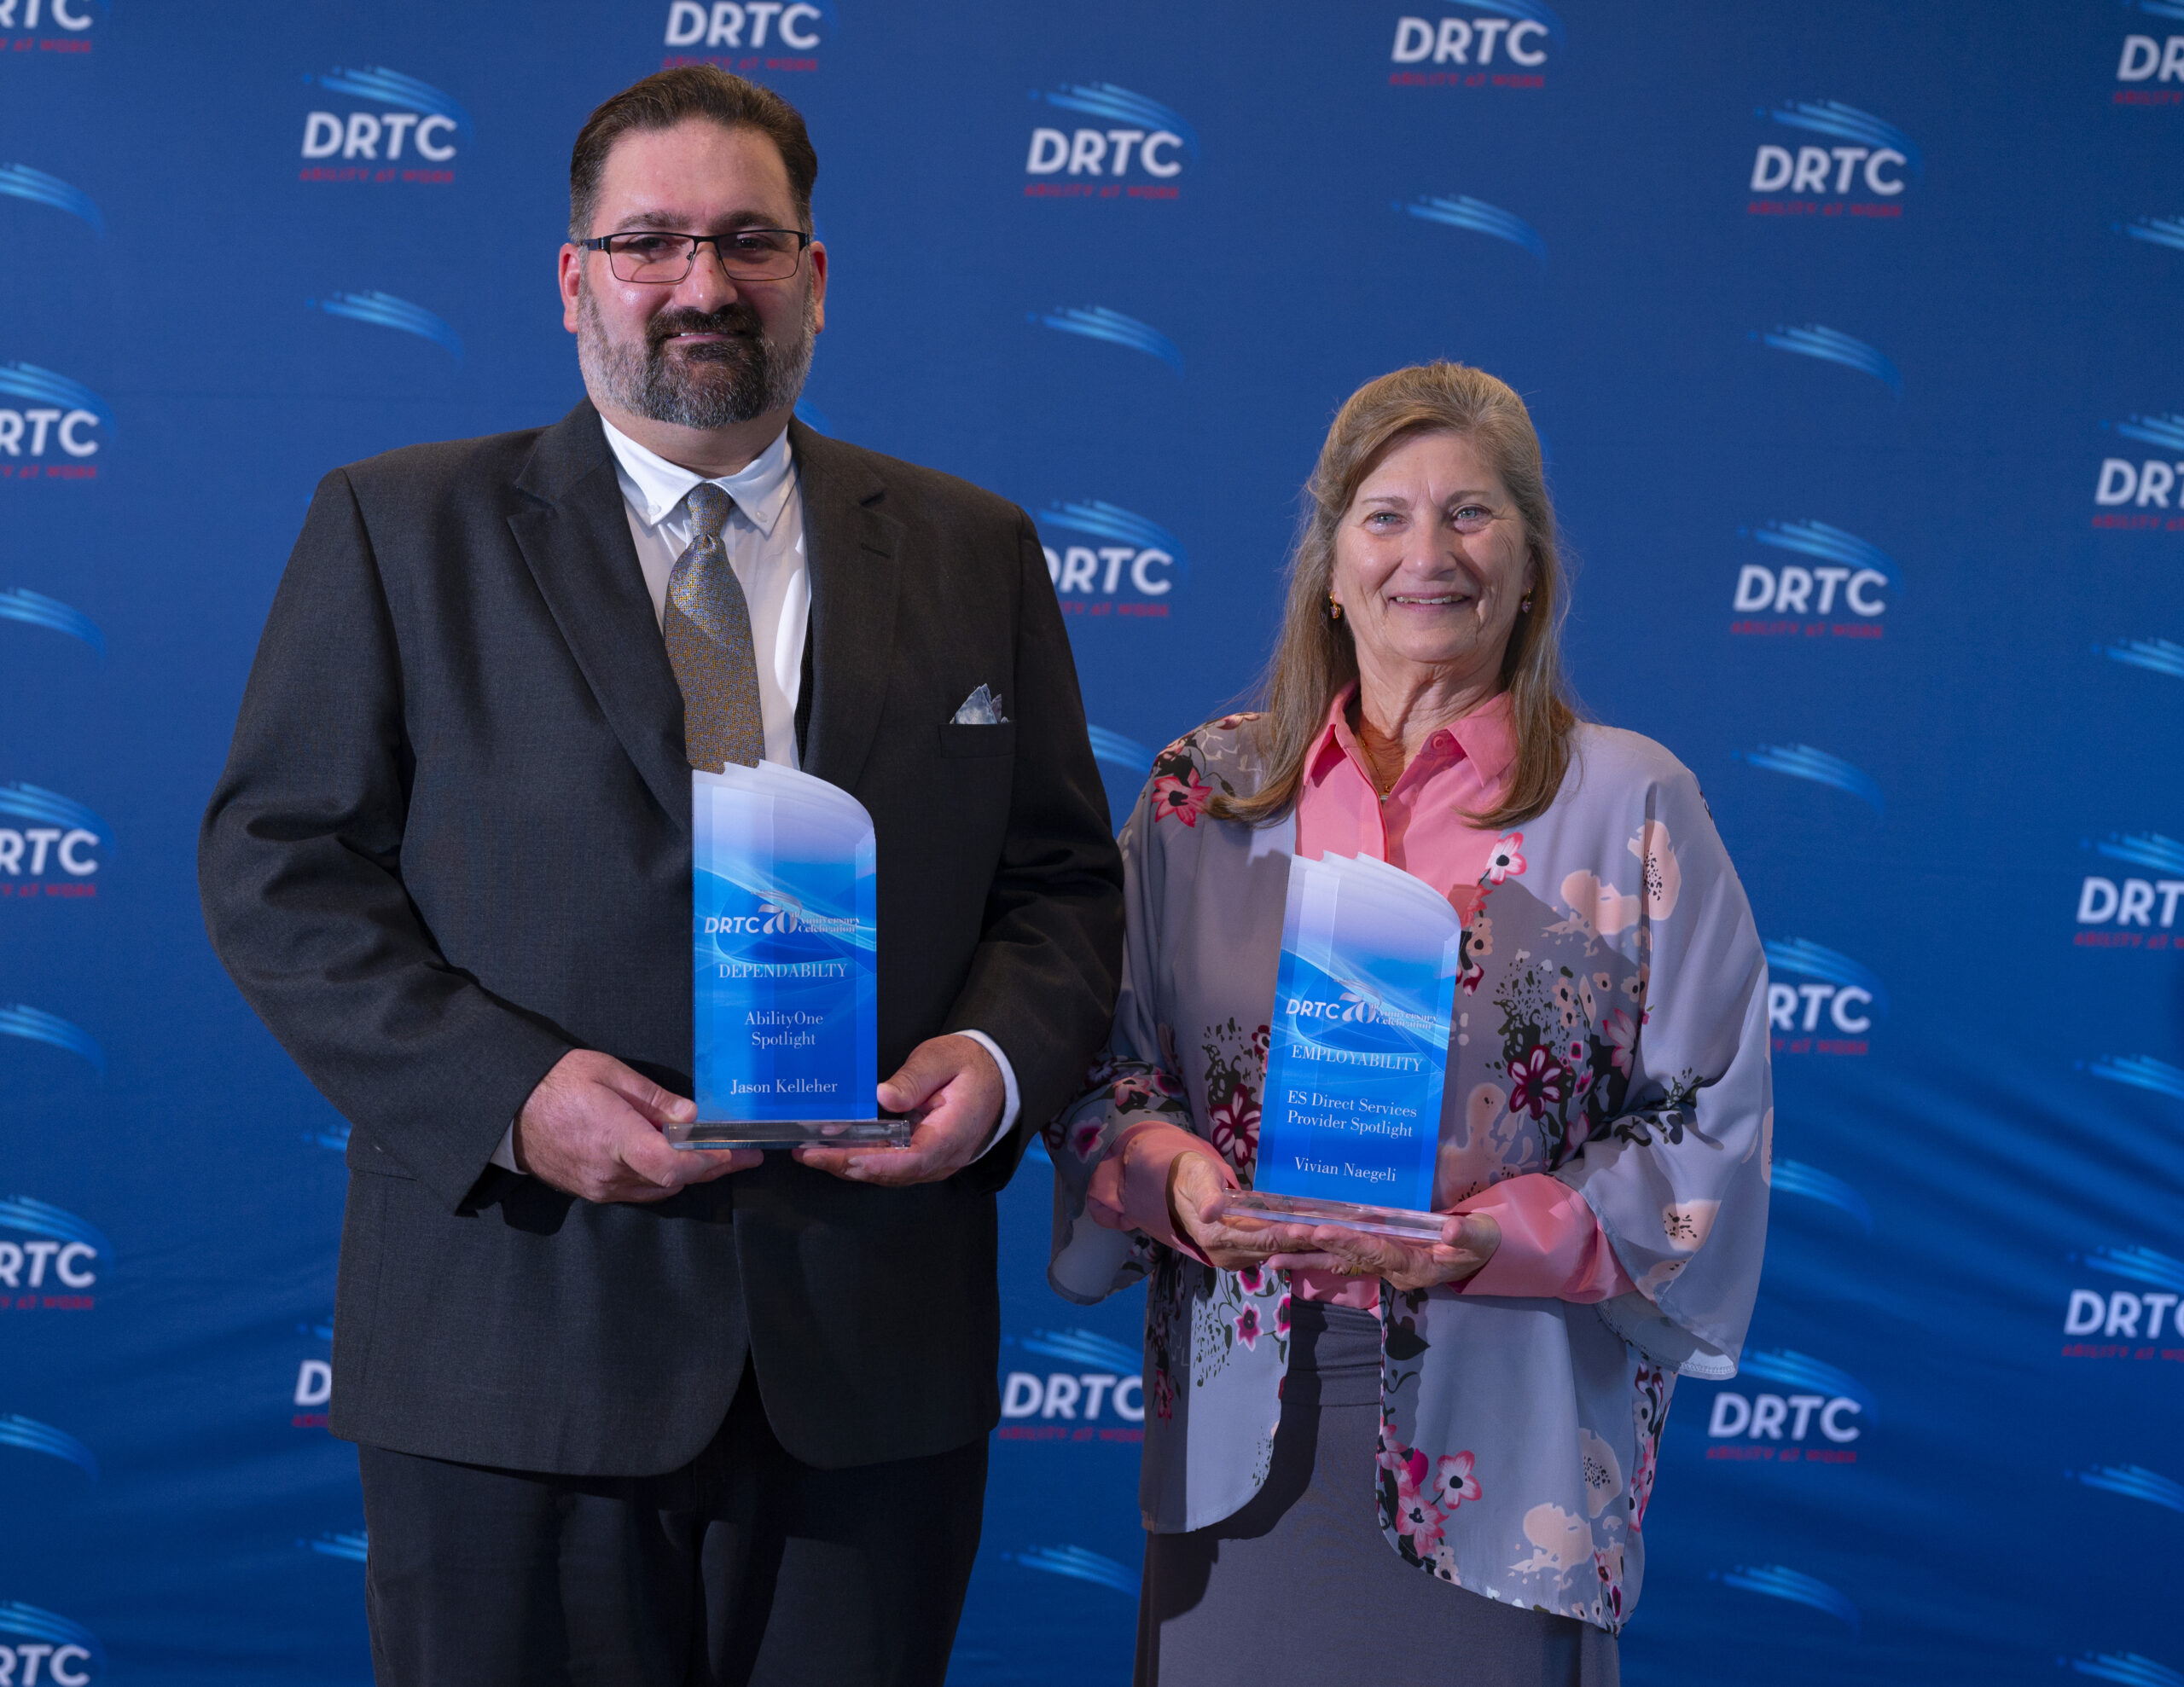 Employability Honorees from DRTC’s 70th Anniversary Gala